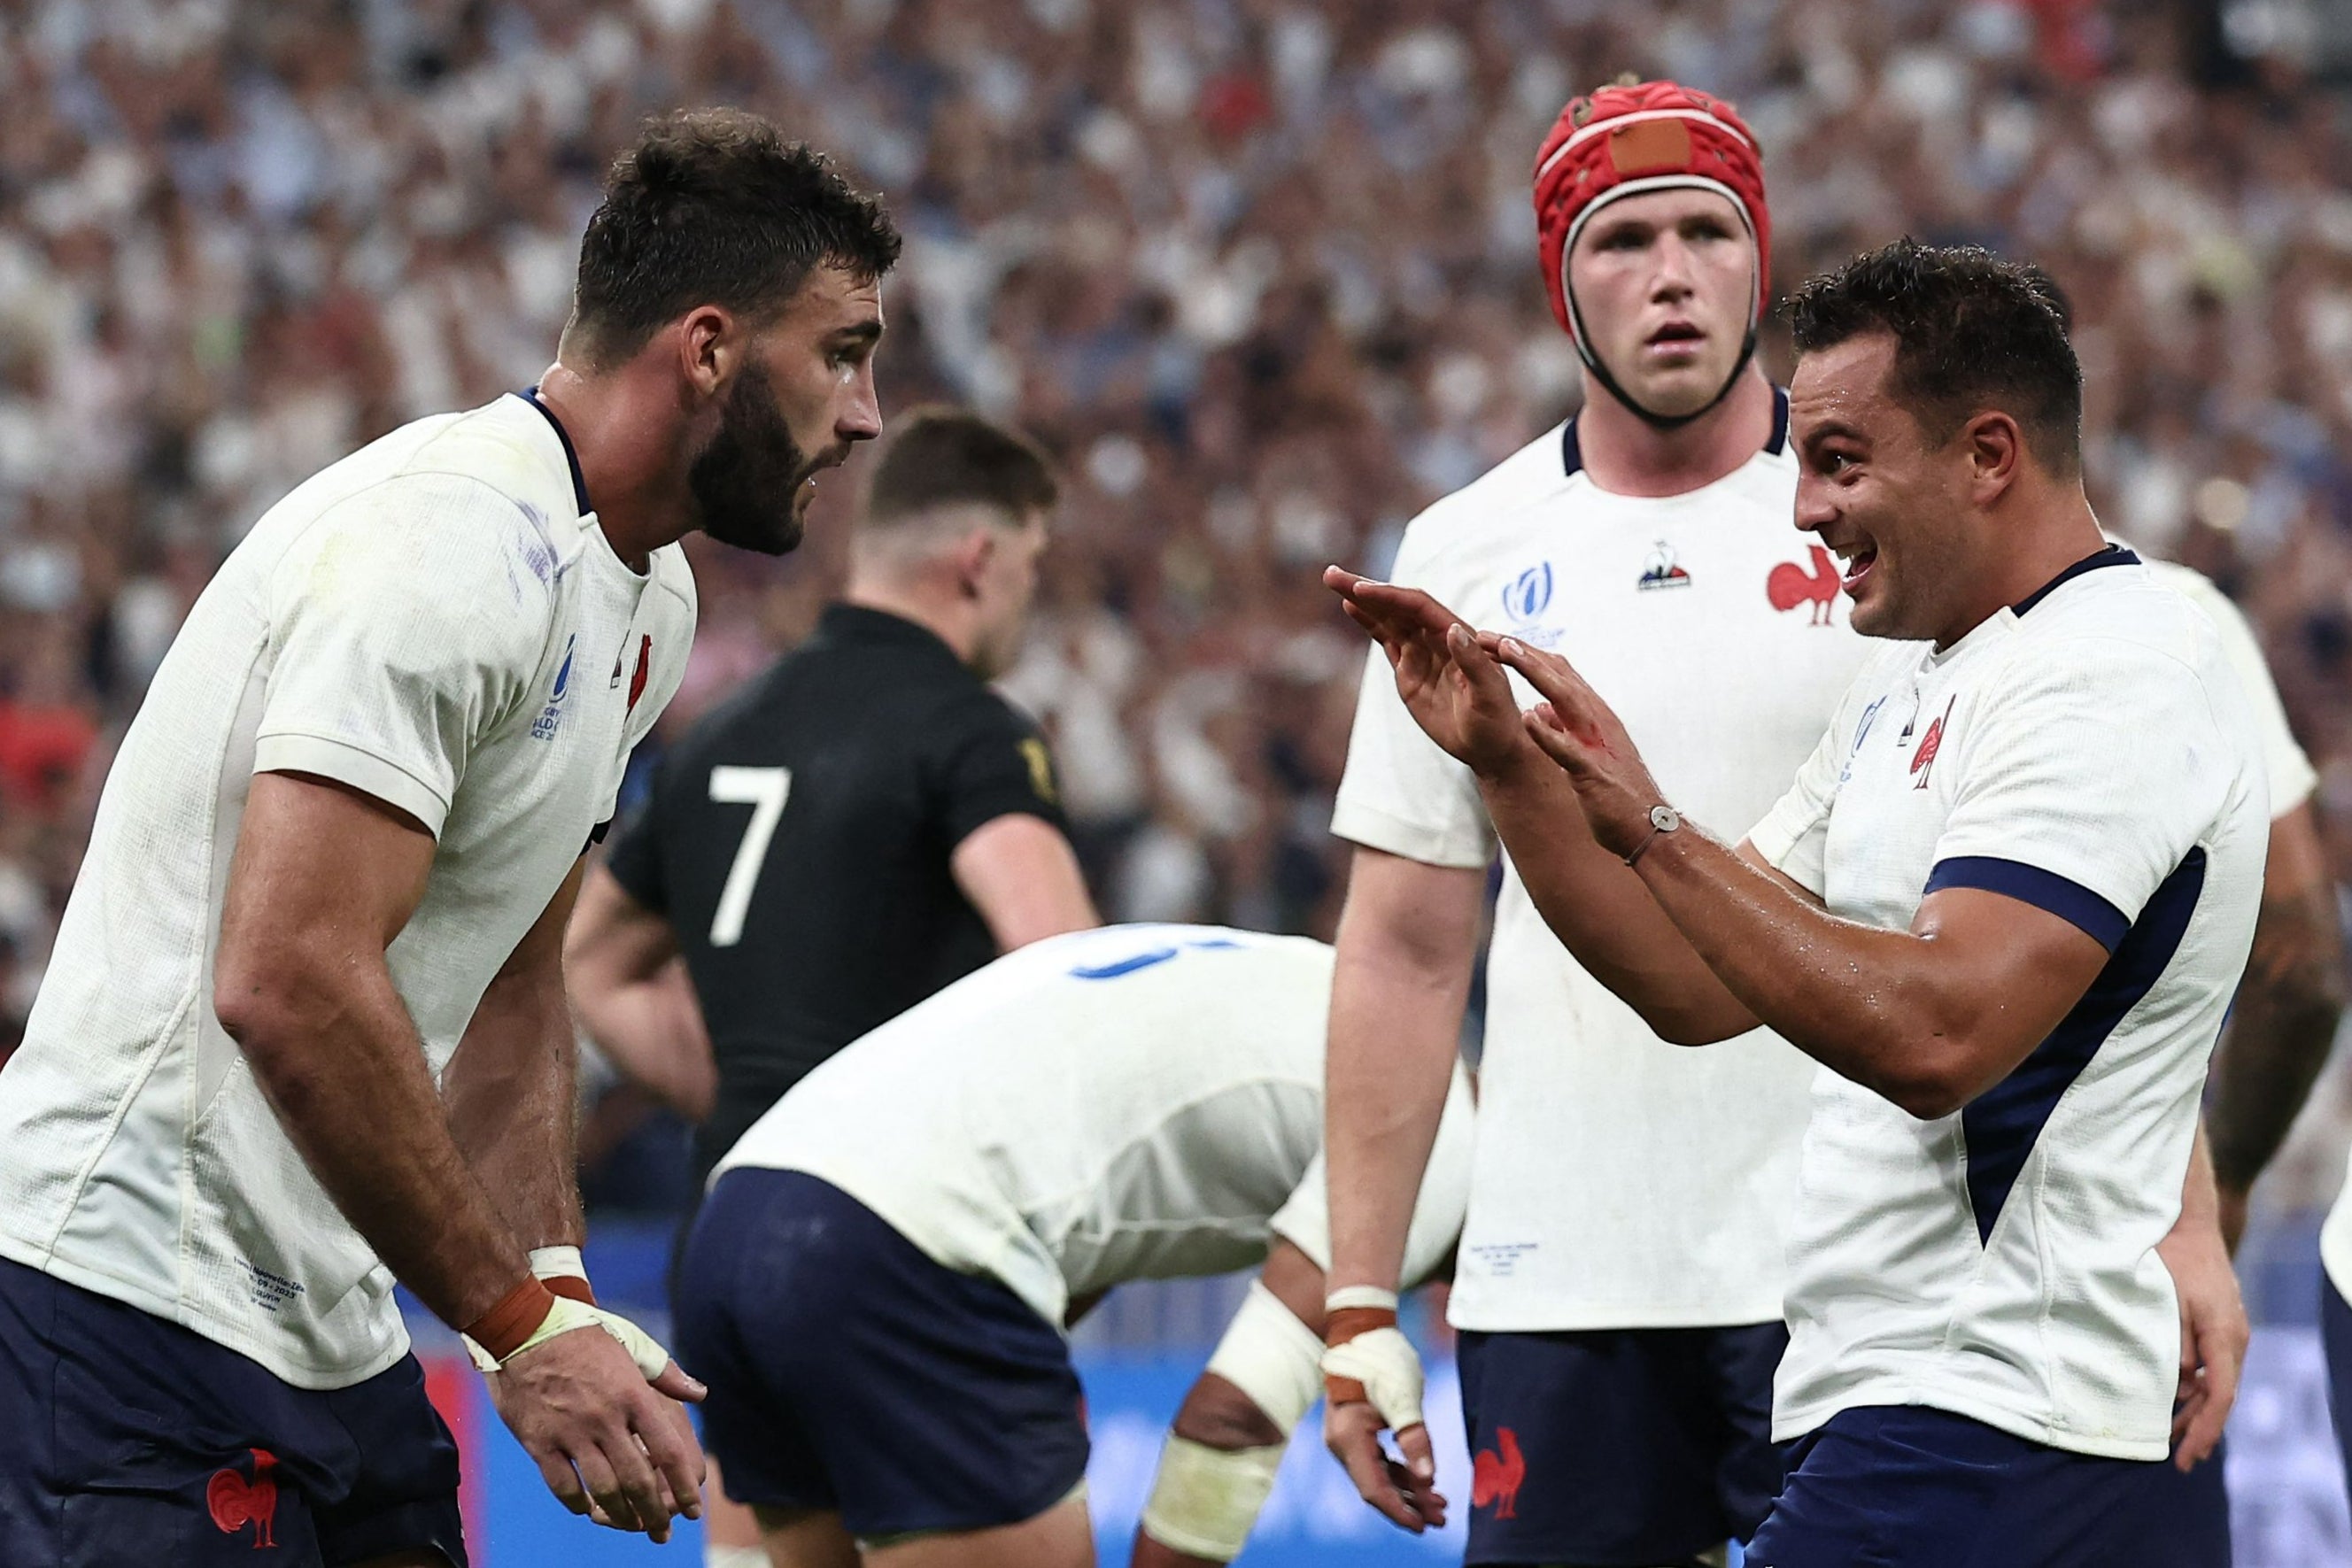 France fought past New Zealand in Paris despite not being at their best